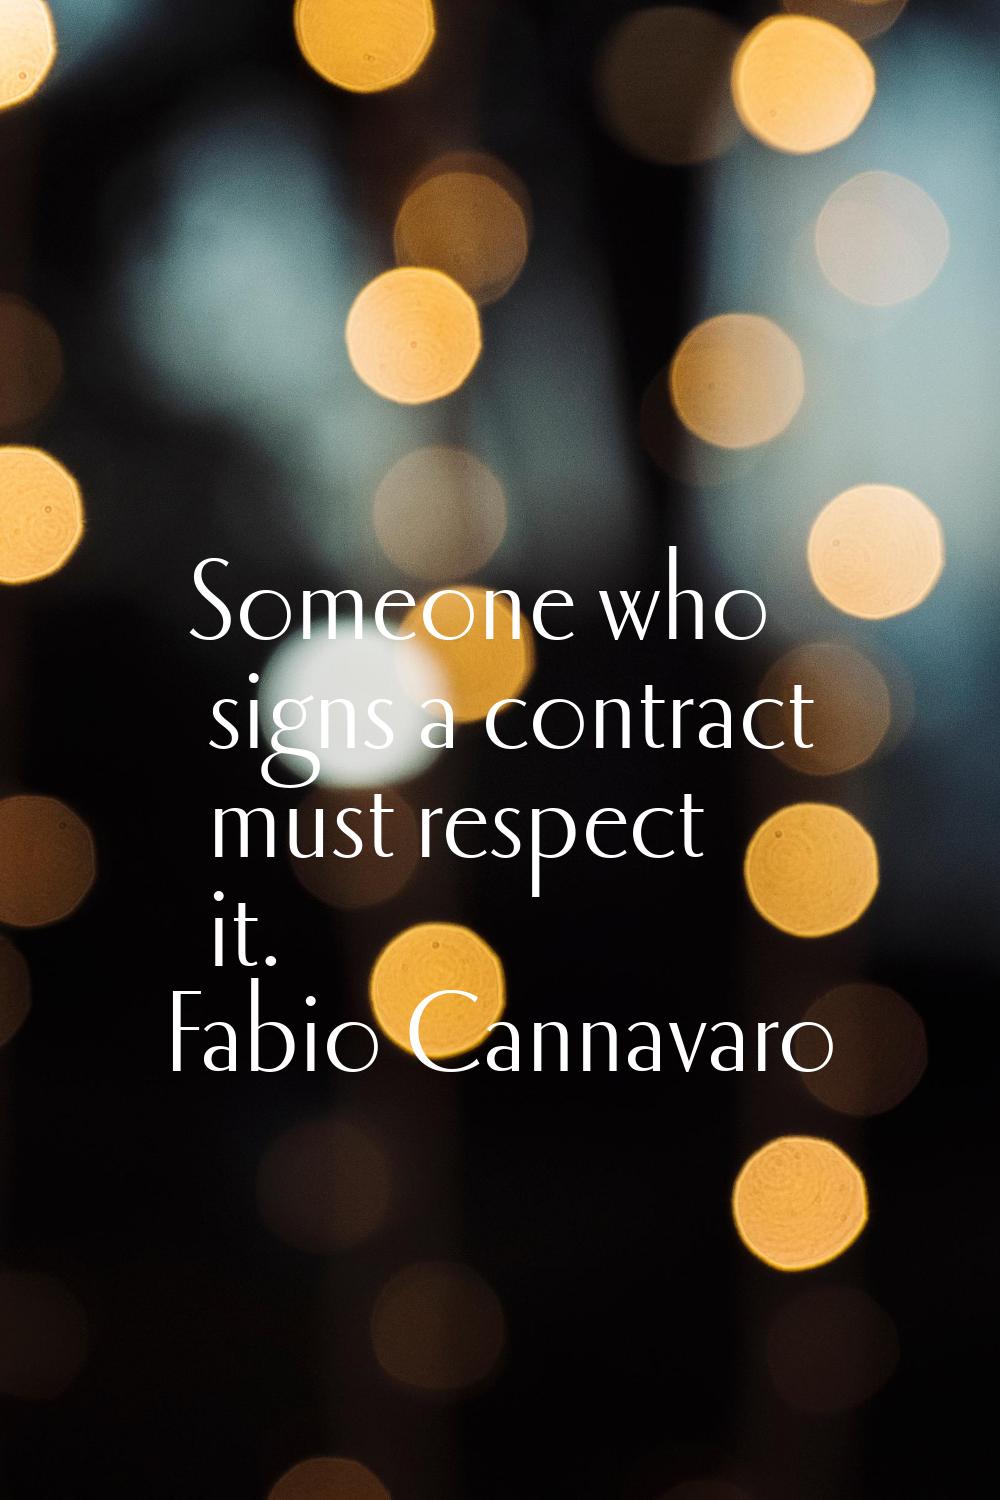 Someone who signs a contract must respect it.